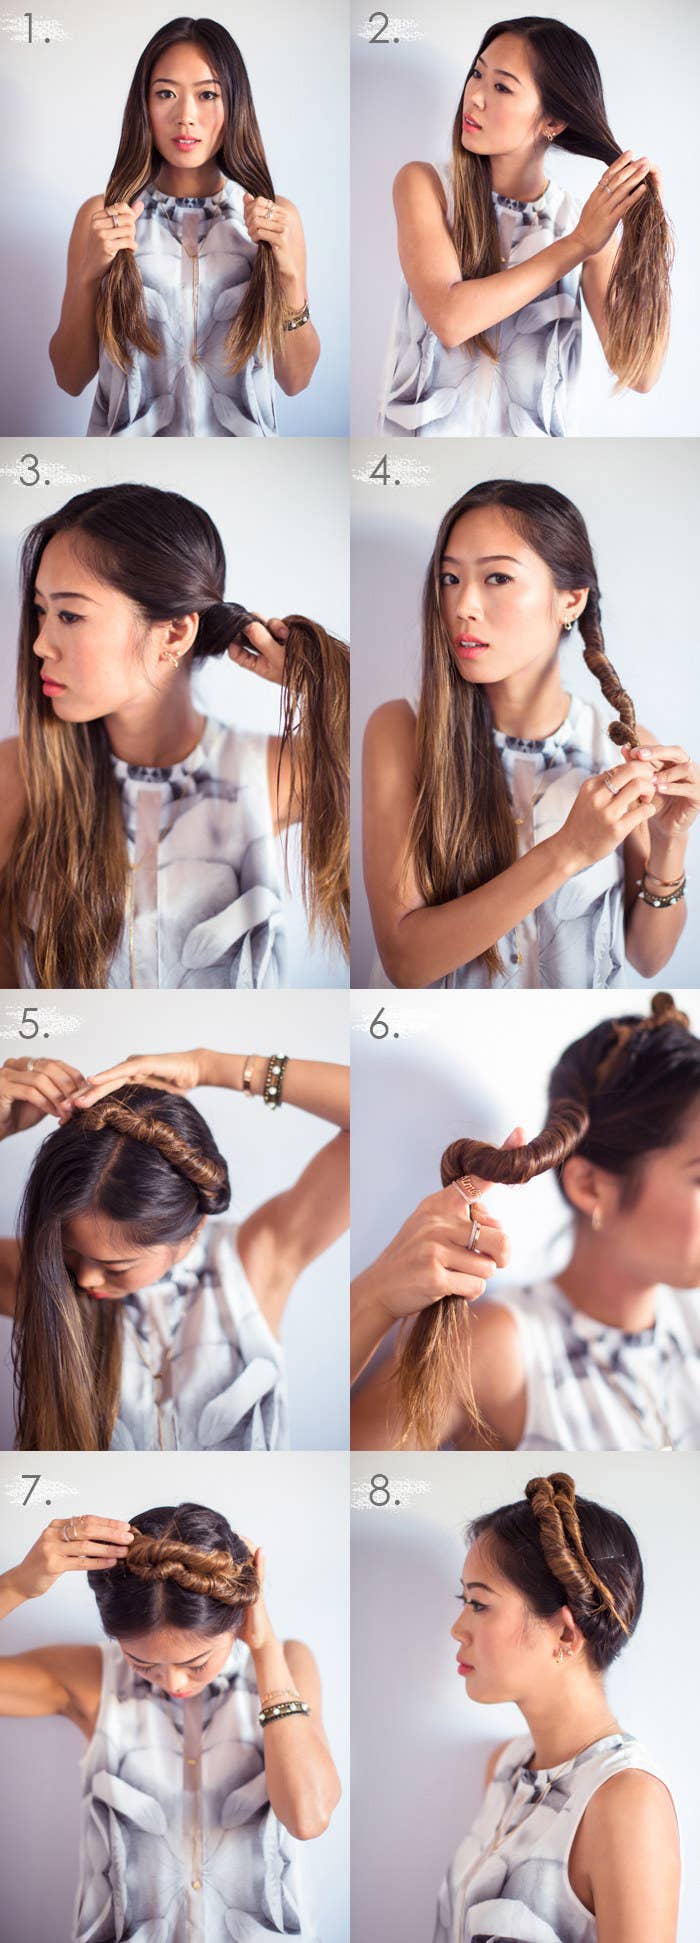 27 Easy Ways To Change Up Your Hair Without The Commitment